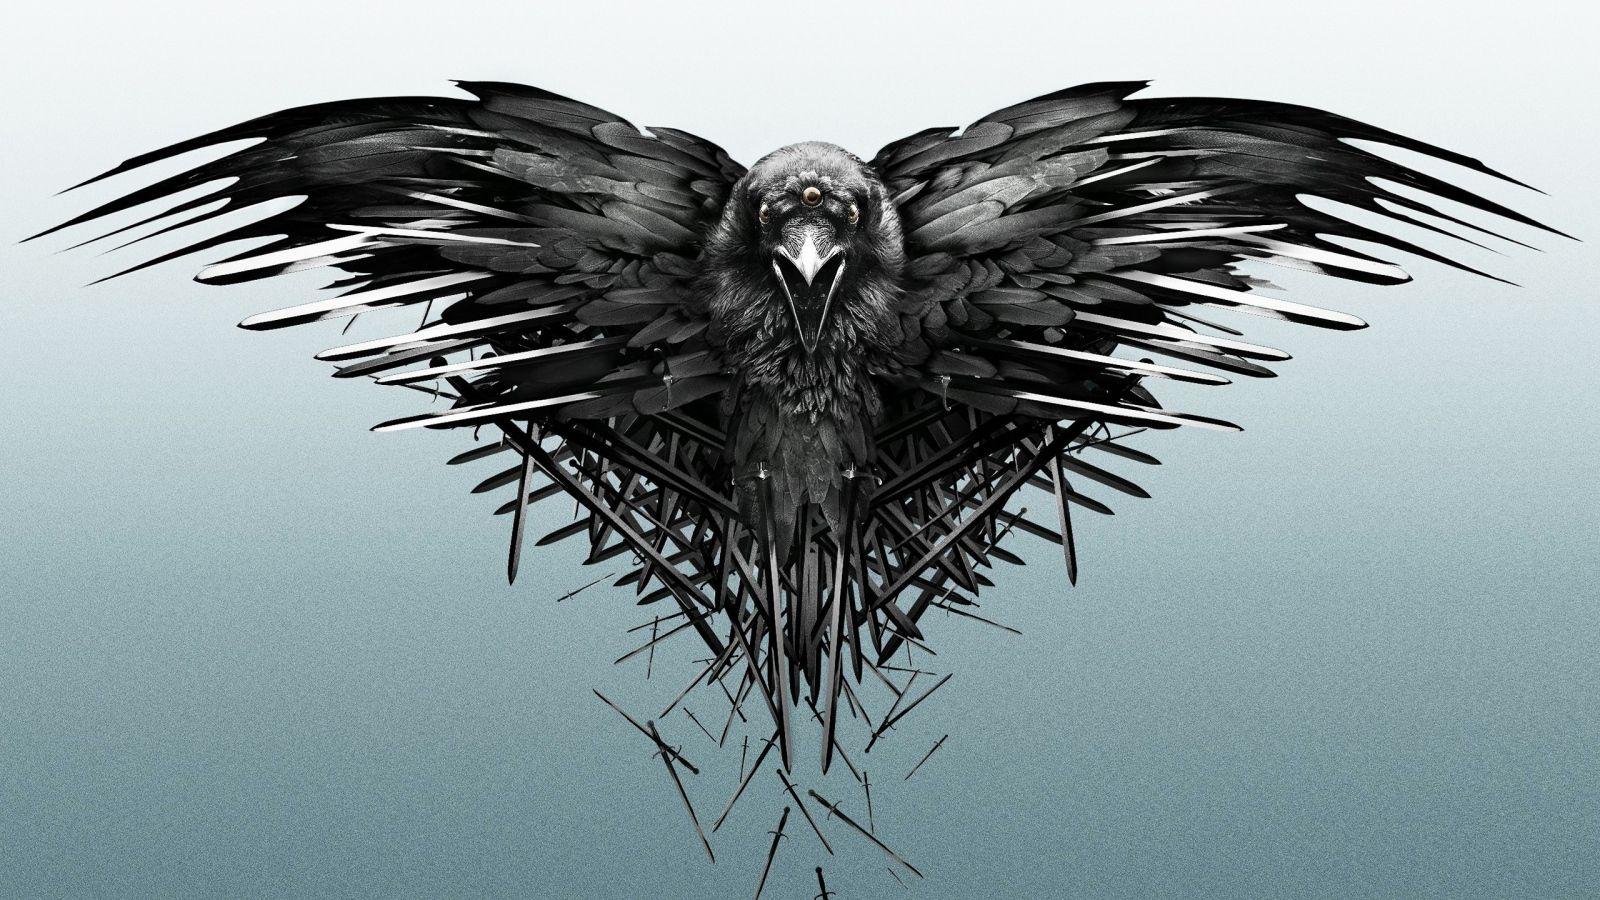 Download Wallpaper 1600x900 Game of thrones, Game, Raven 1600x900